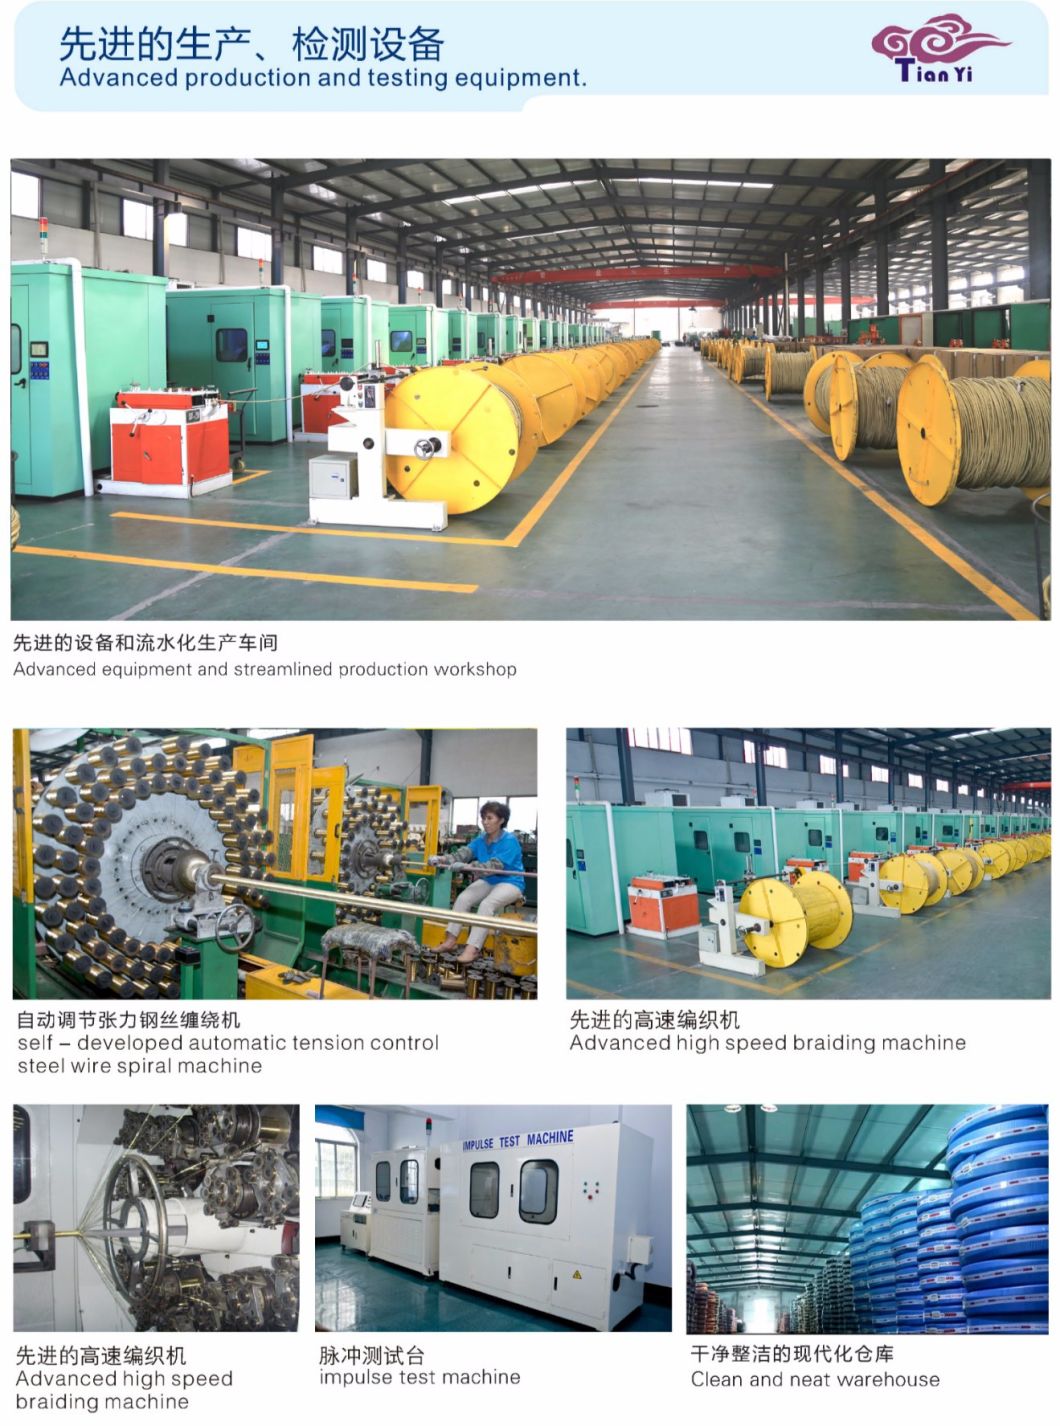 Steel Wire Braid Spiral Hydraulic Rubber Hose, Air Hose, Flexible Hose Pipe, EPDM Steam Tube, Industrial Tubing, High Pressure Hose Fitting Couplings